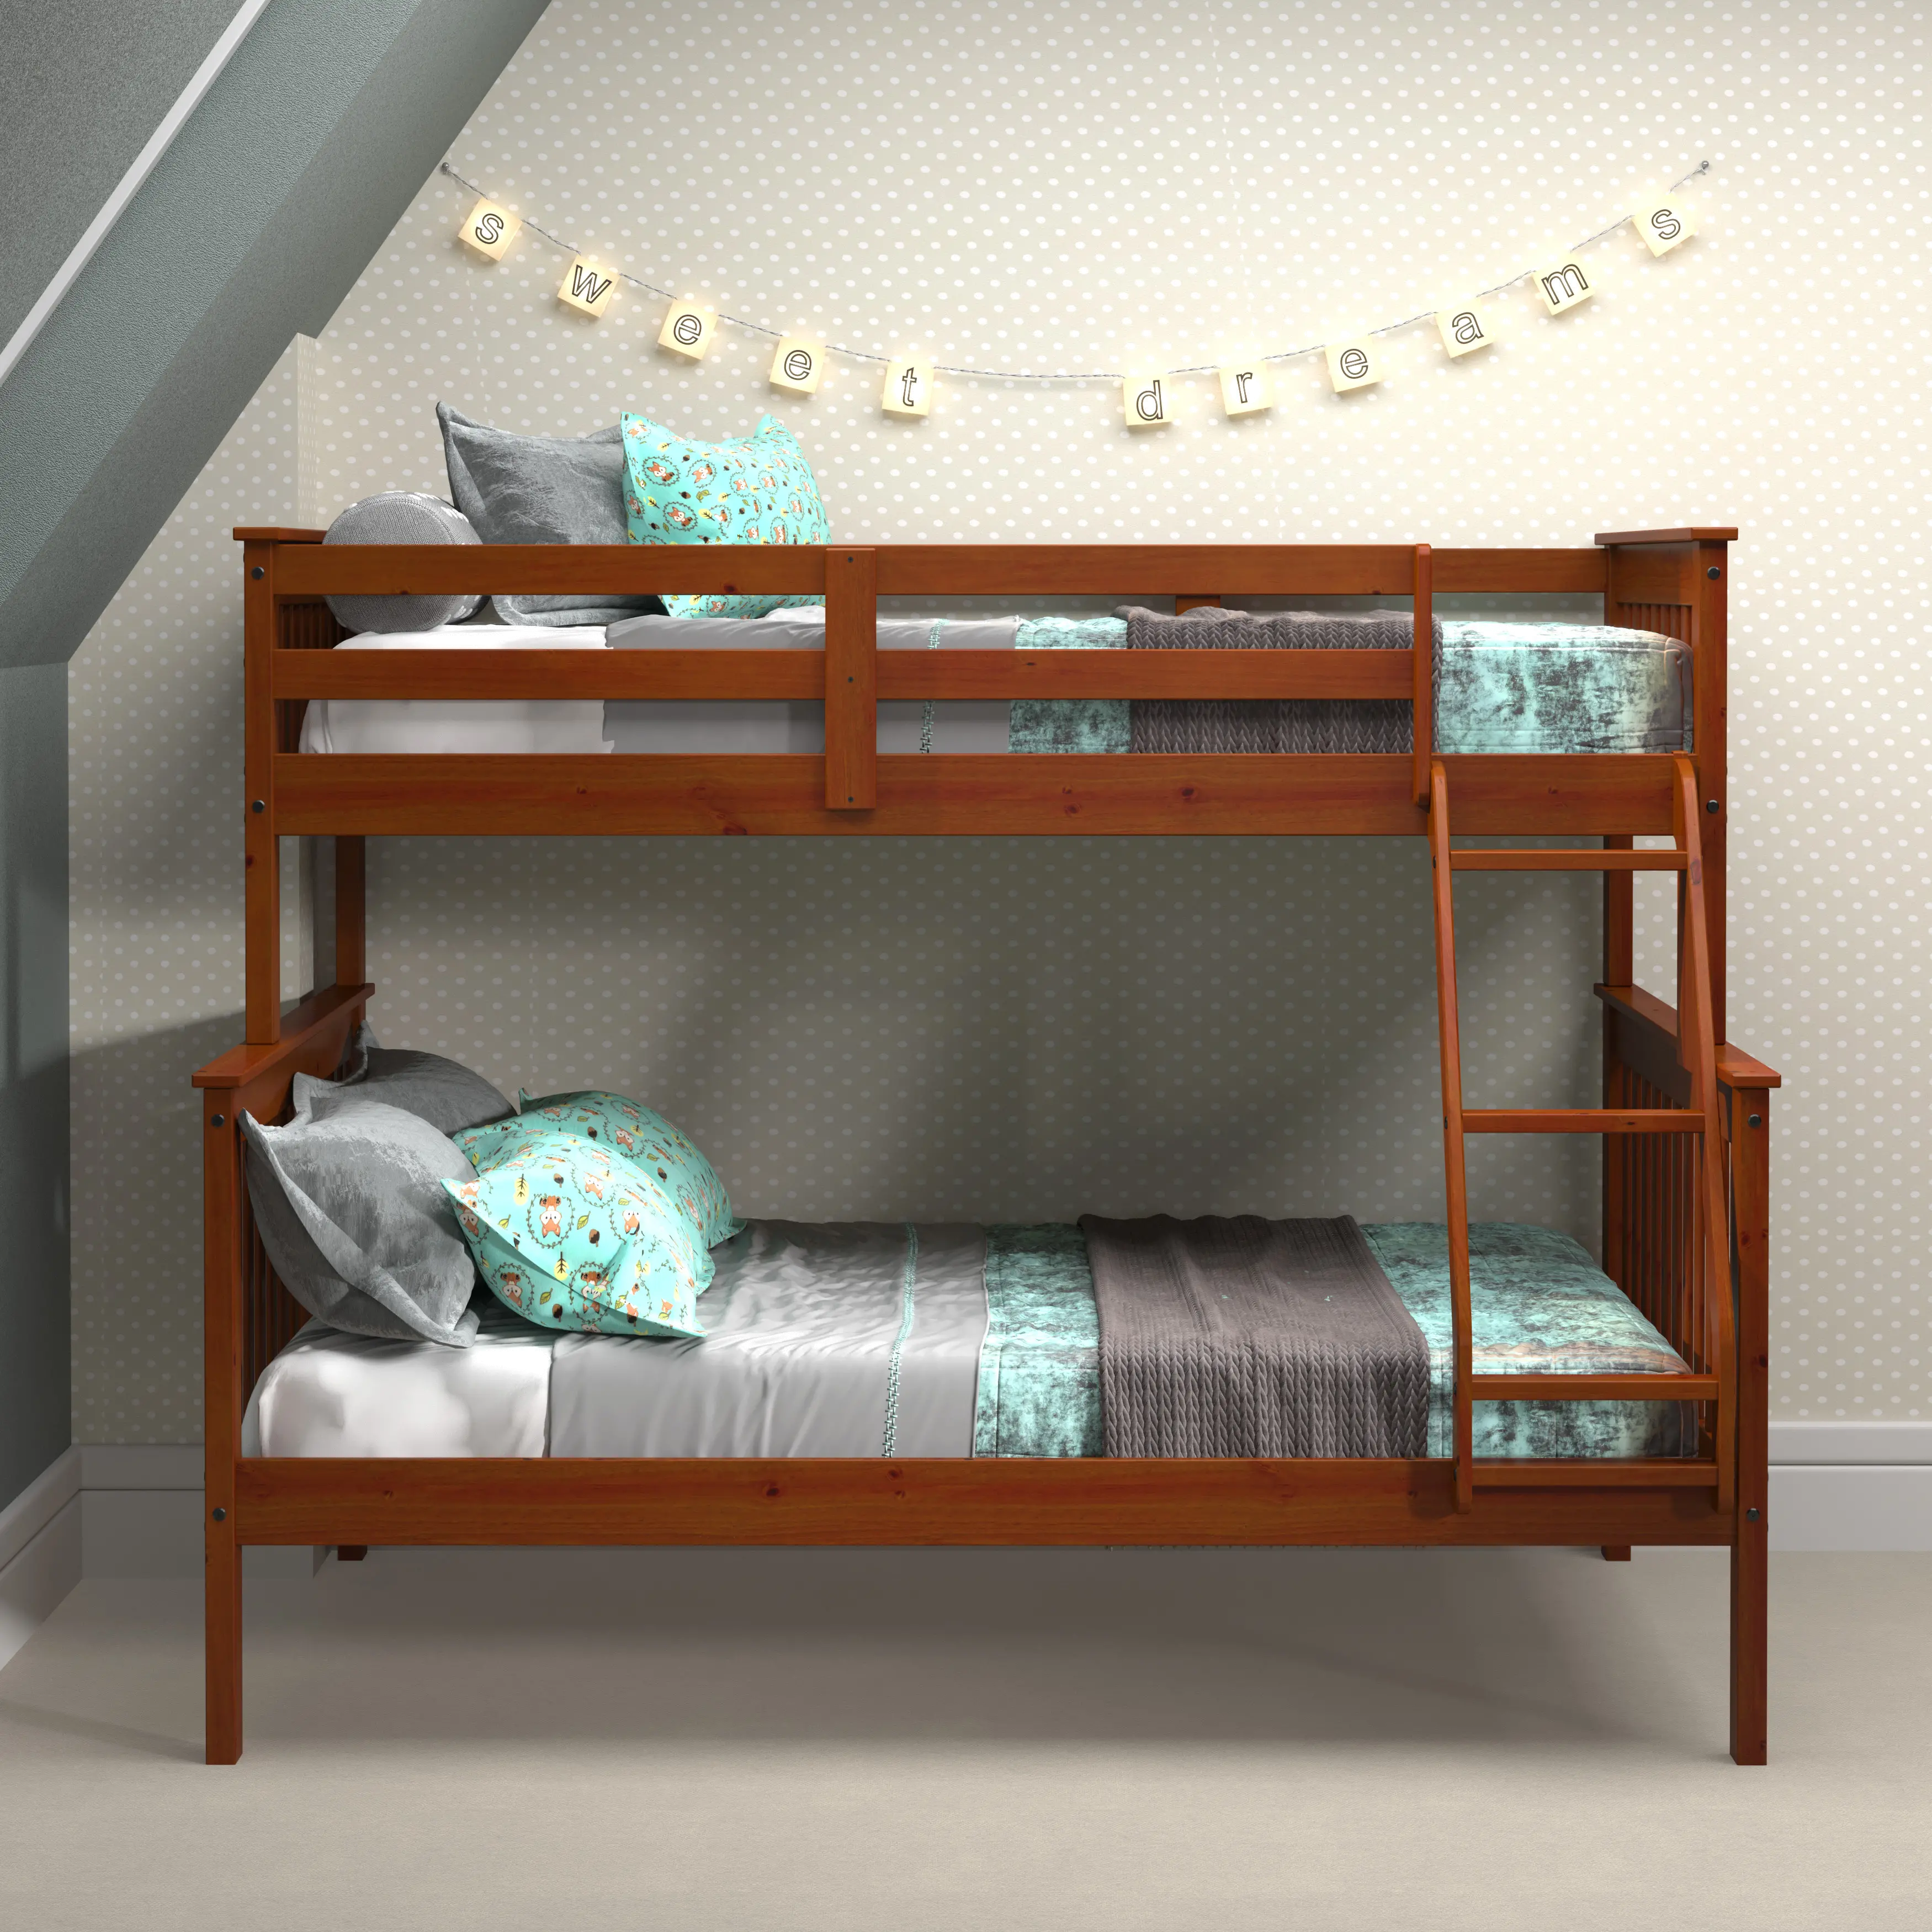 122-3-TFE Espresso Brown Twin-over-Full Bunk Bed - Craftsman sku 122-3-TFE